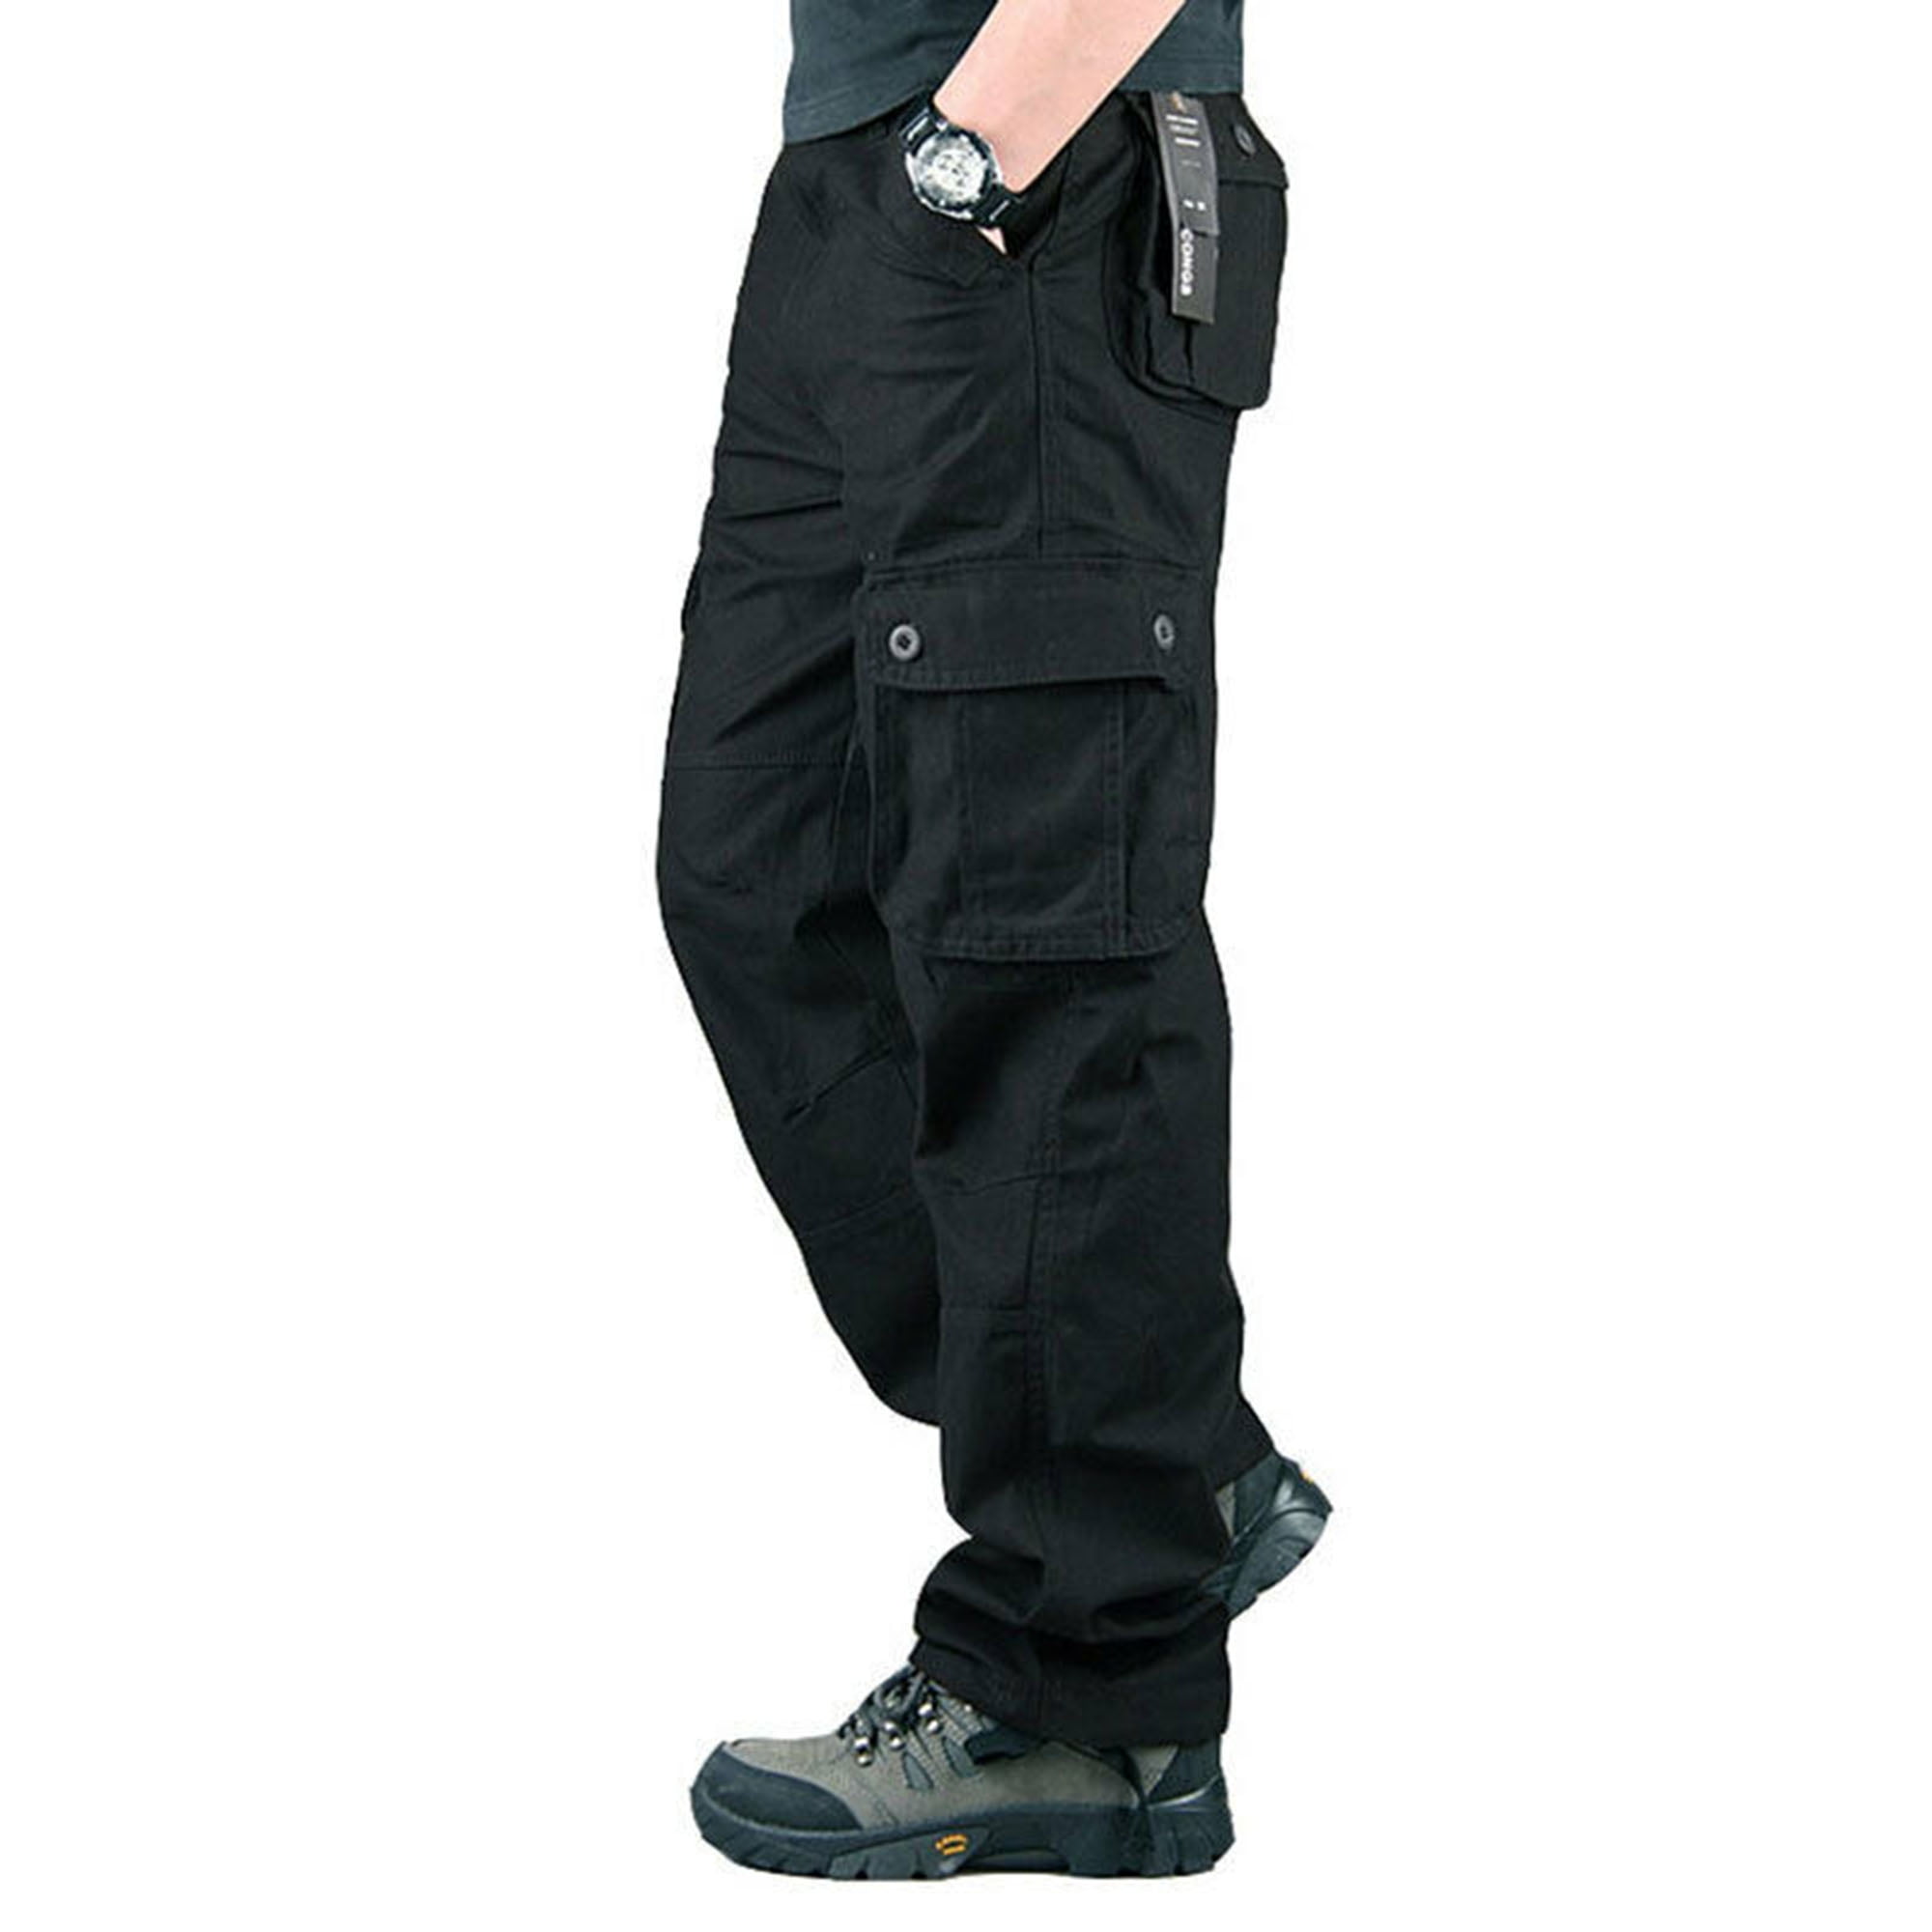 YouLoveIt Men's Casual Work Cargo Pants Outdoor Hiking Pants Multi